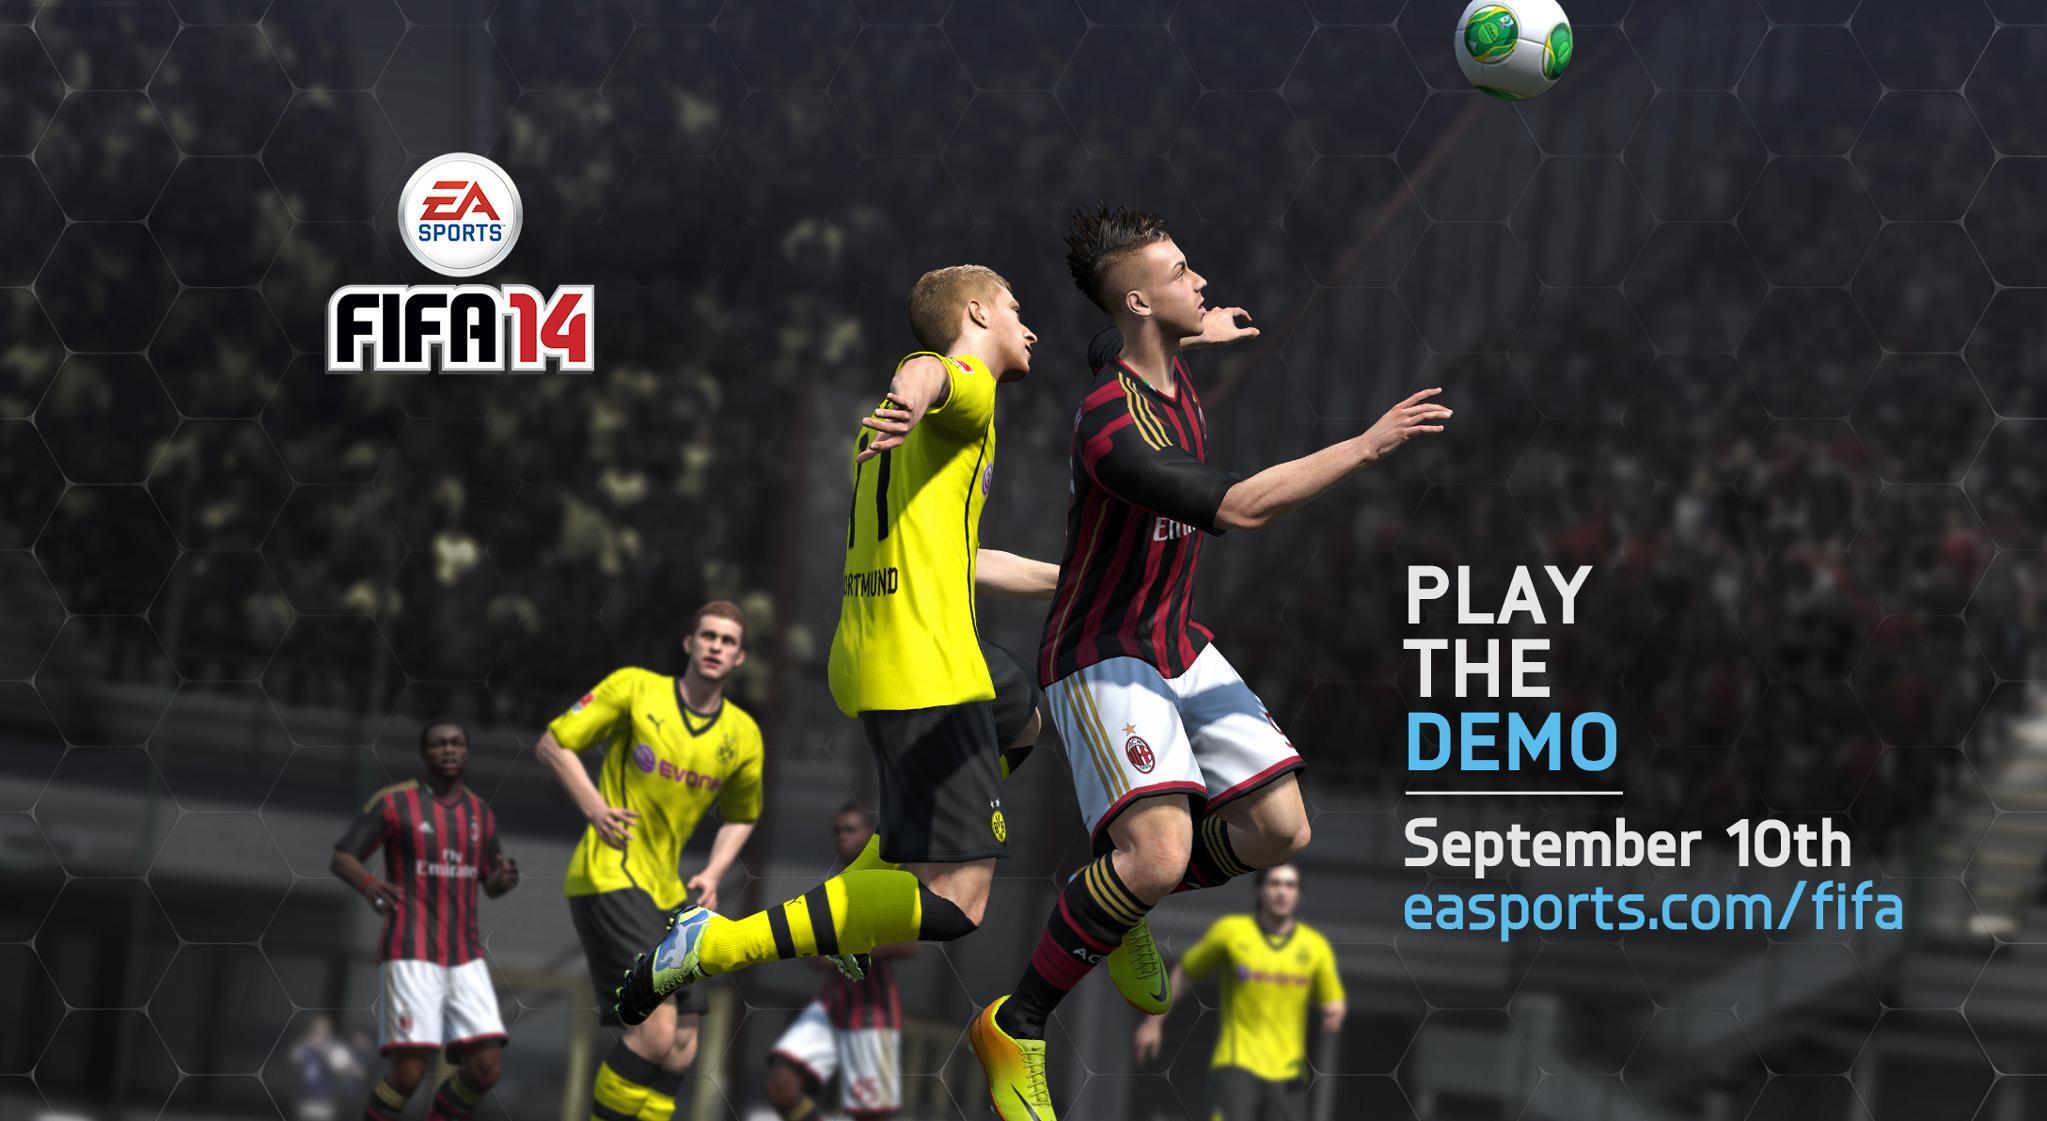 Kip Grit Verdorde EA SPORTS FIFA on Twitter: "Tomorrow. September 10th. Play the #FIFA14 demo  on Xbox 360, PS3 and PC. http://t.co/SmtBESJ51T" / Twitter